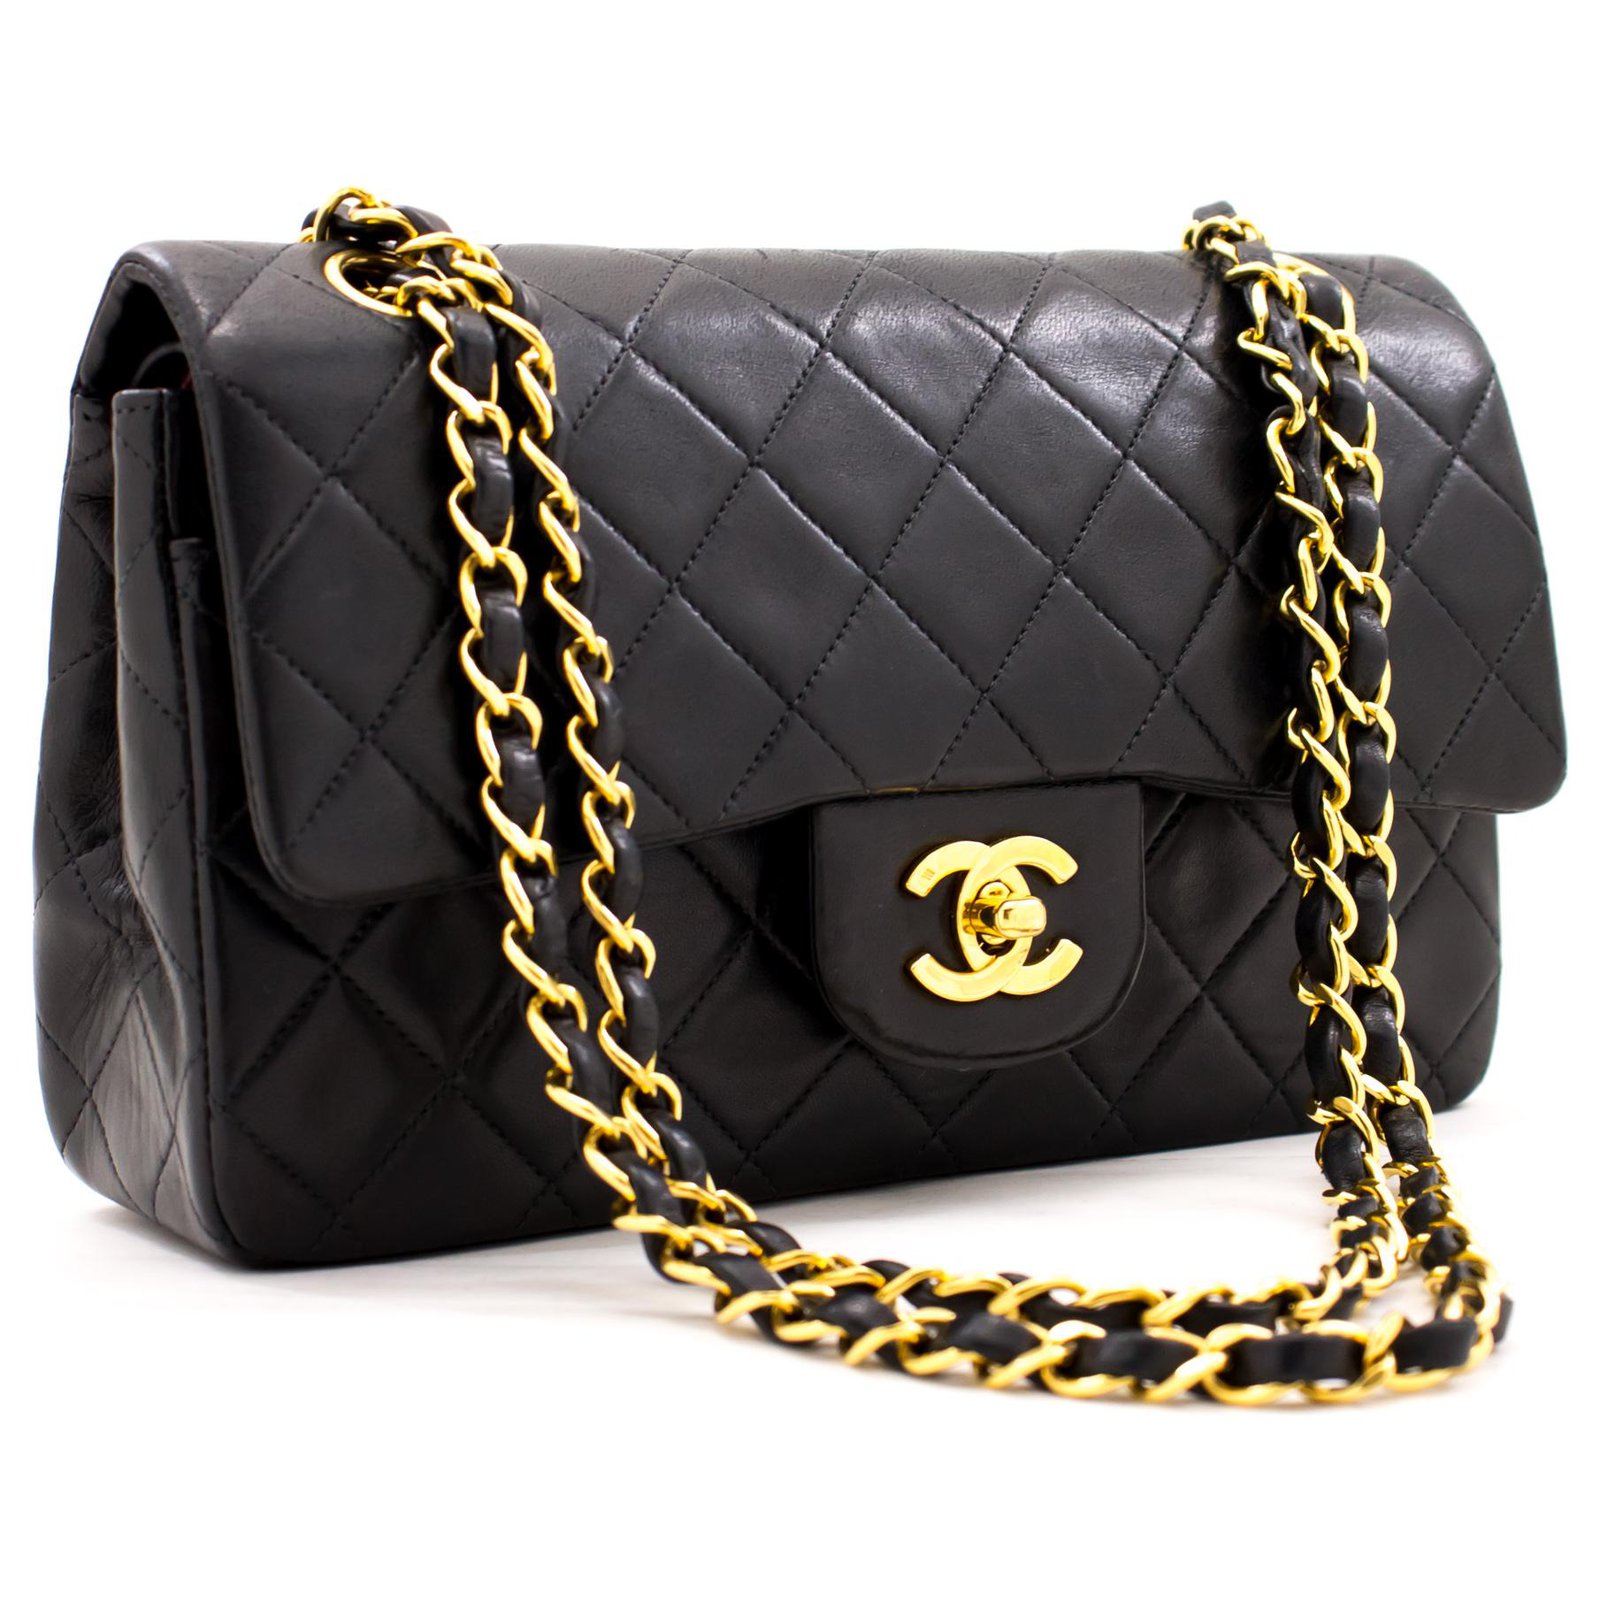 Chanel 2.55 lined flap 9